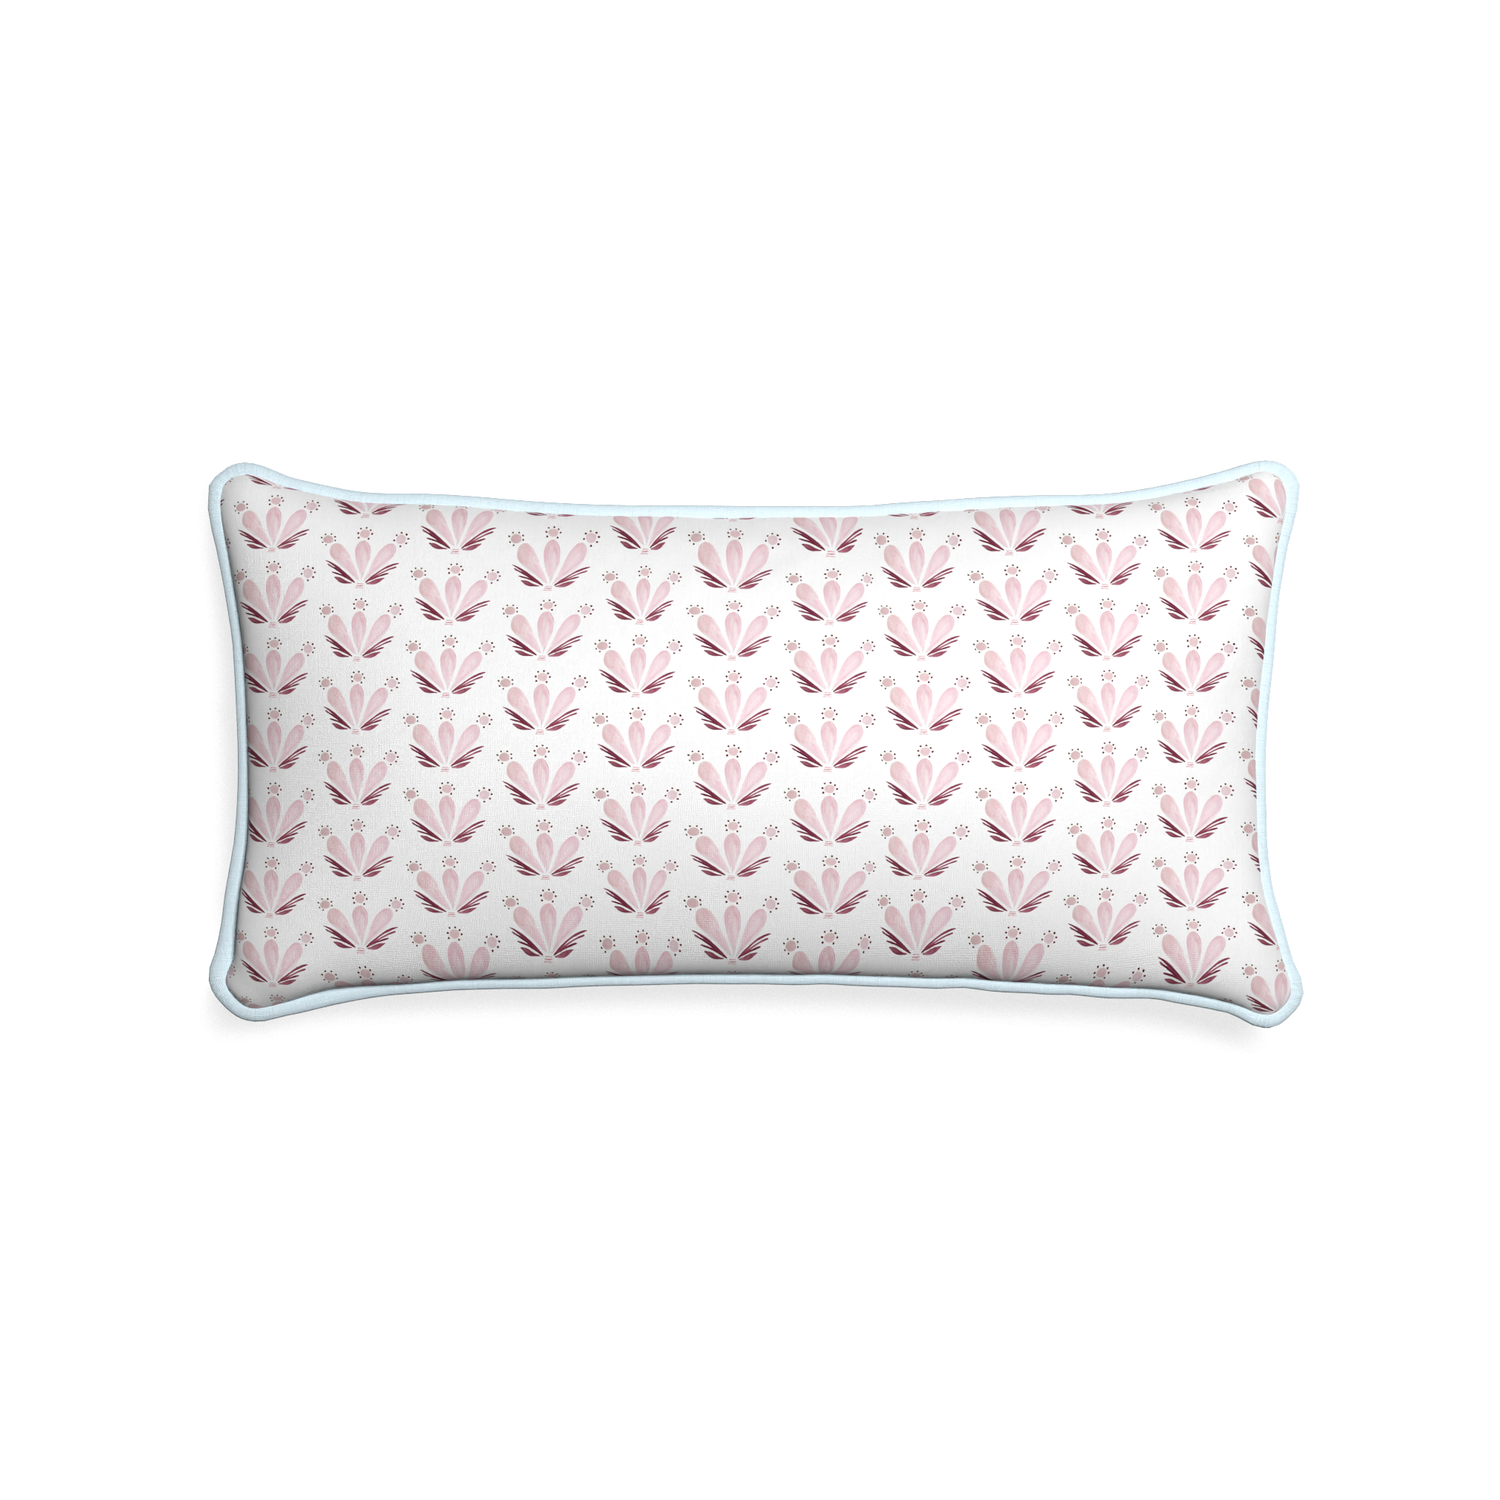 Midi-lumbar serena pink custom pink & burgundy drop repeat floralpillow with powder piping on white background